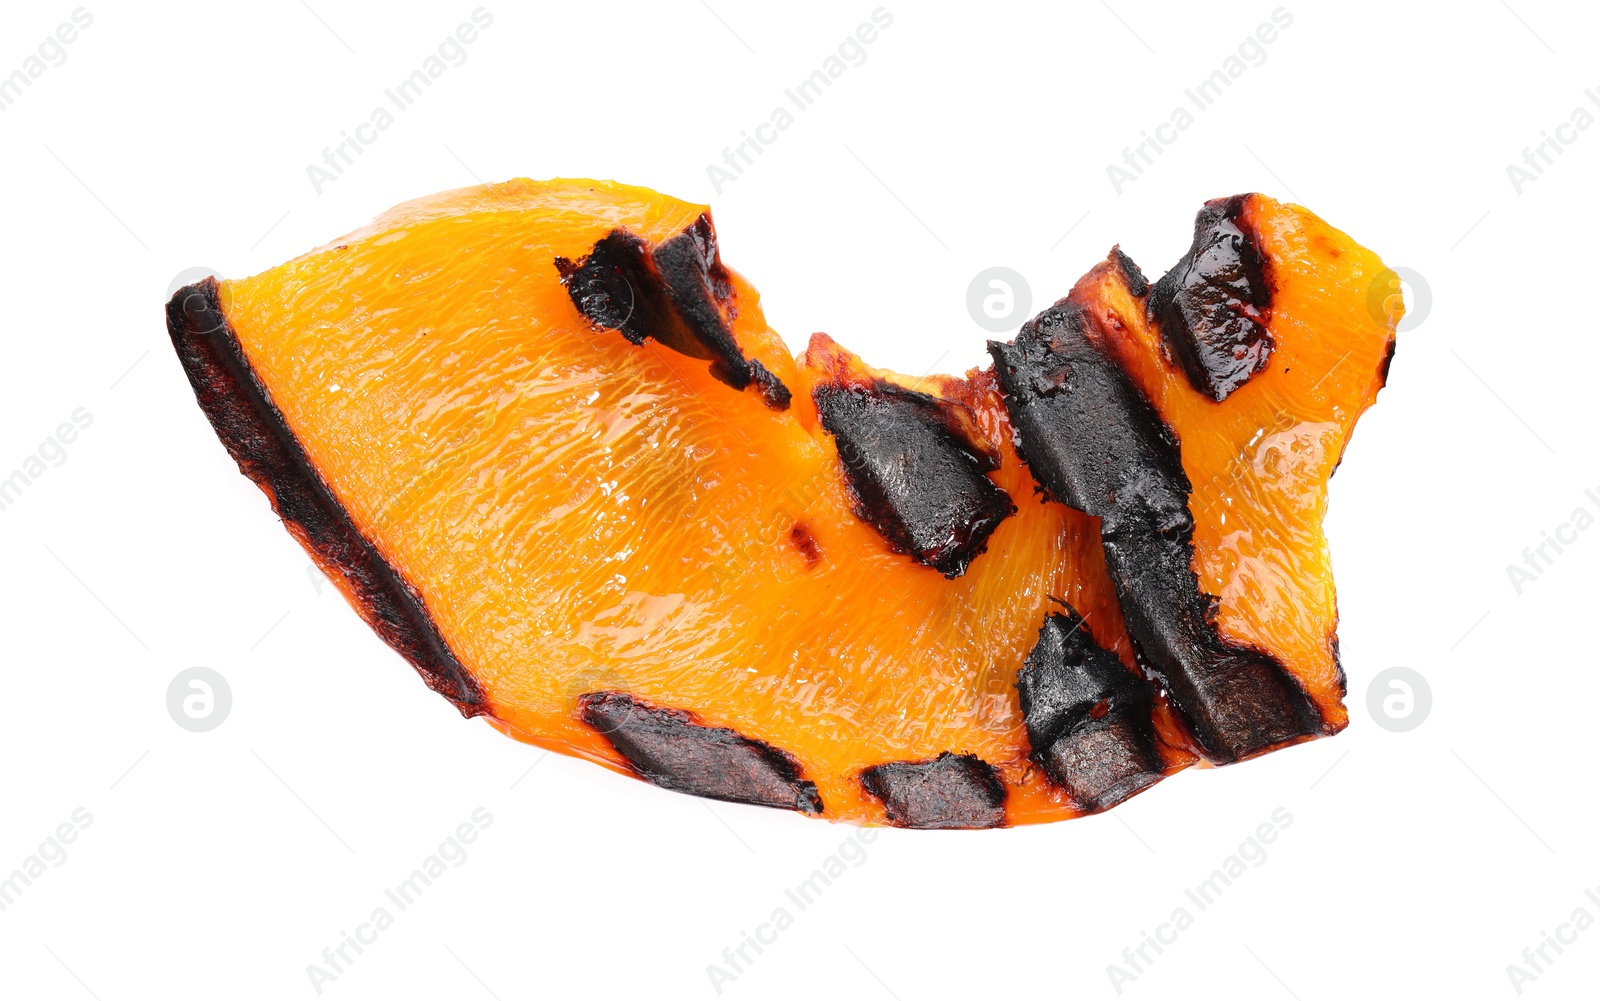 Photo of Slice of grilled orange pepper isolated on white